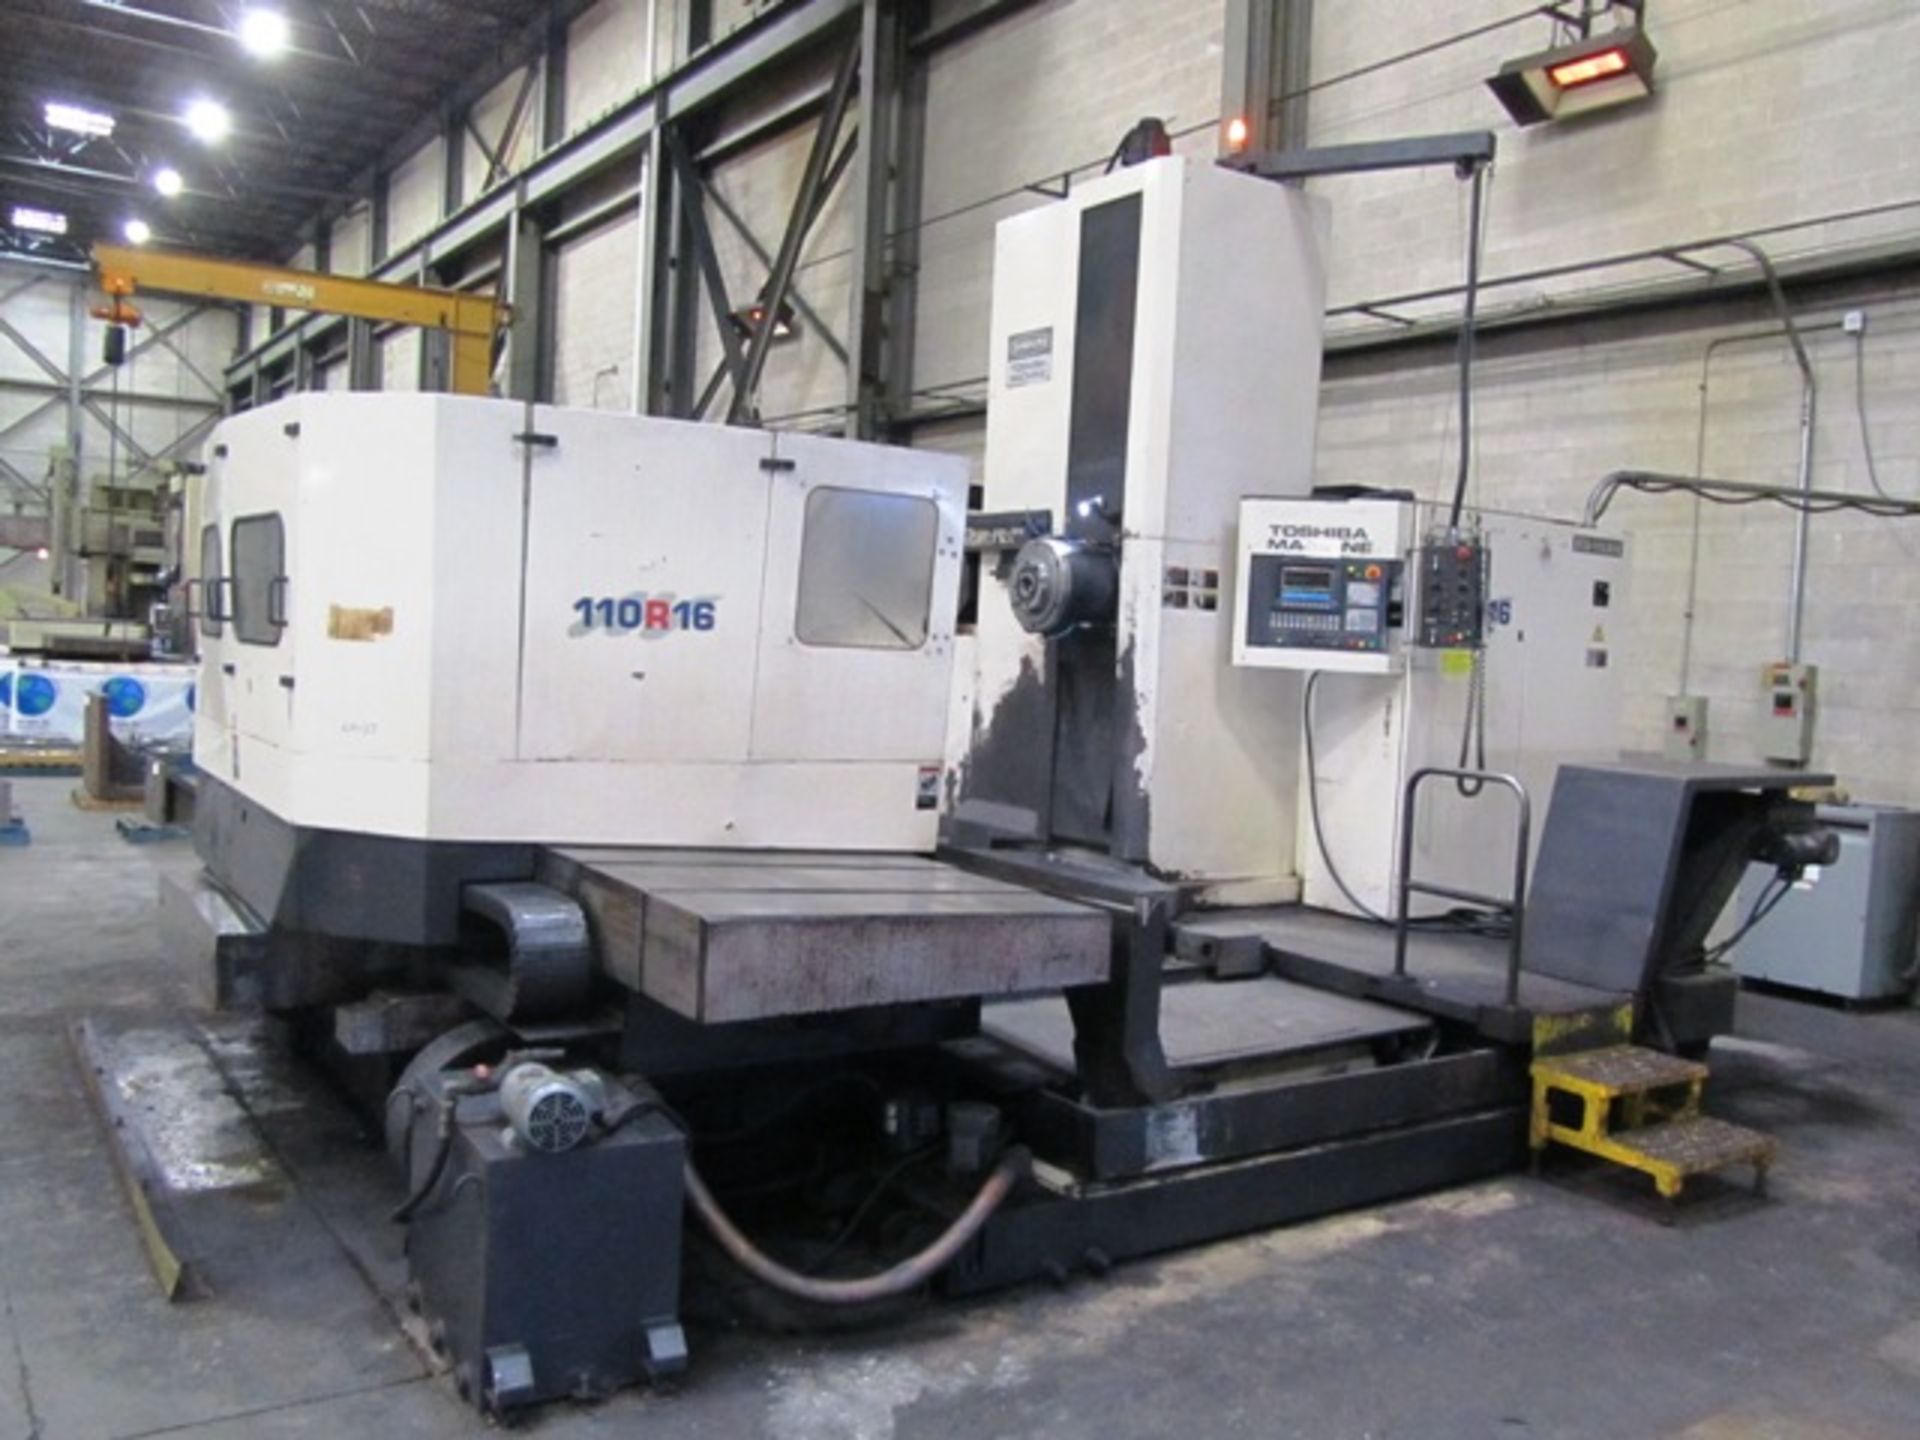 Toshiba BTD-110.R16 4.33'' CNC Table Type Horizontal Boring Mill with 38-ATC, 78.74'' X-Axis, 70. - Image 3 of 8